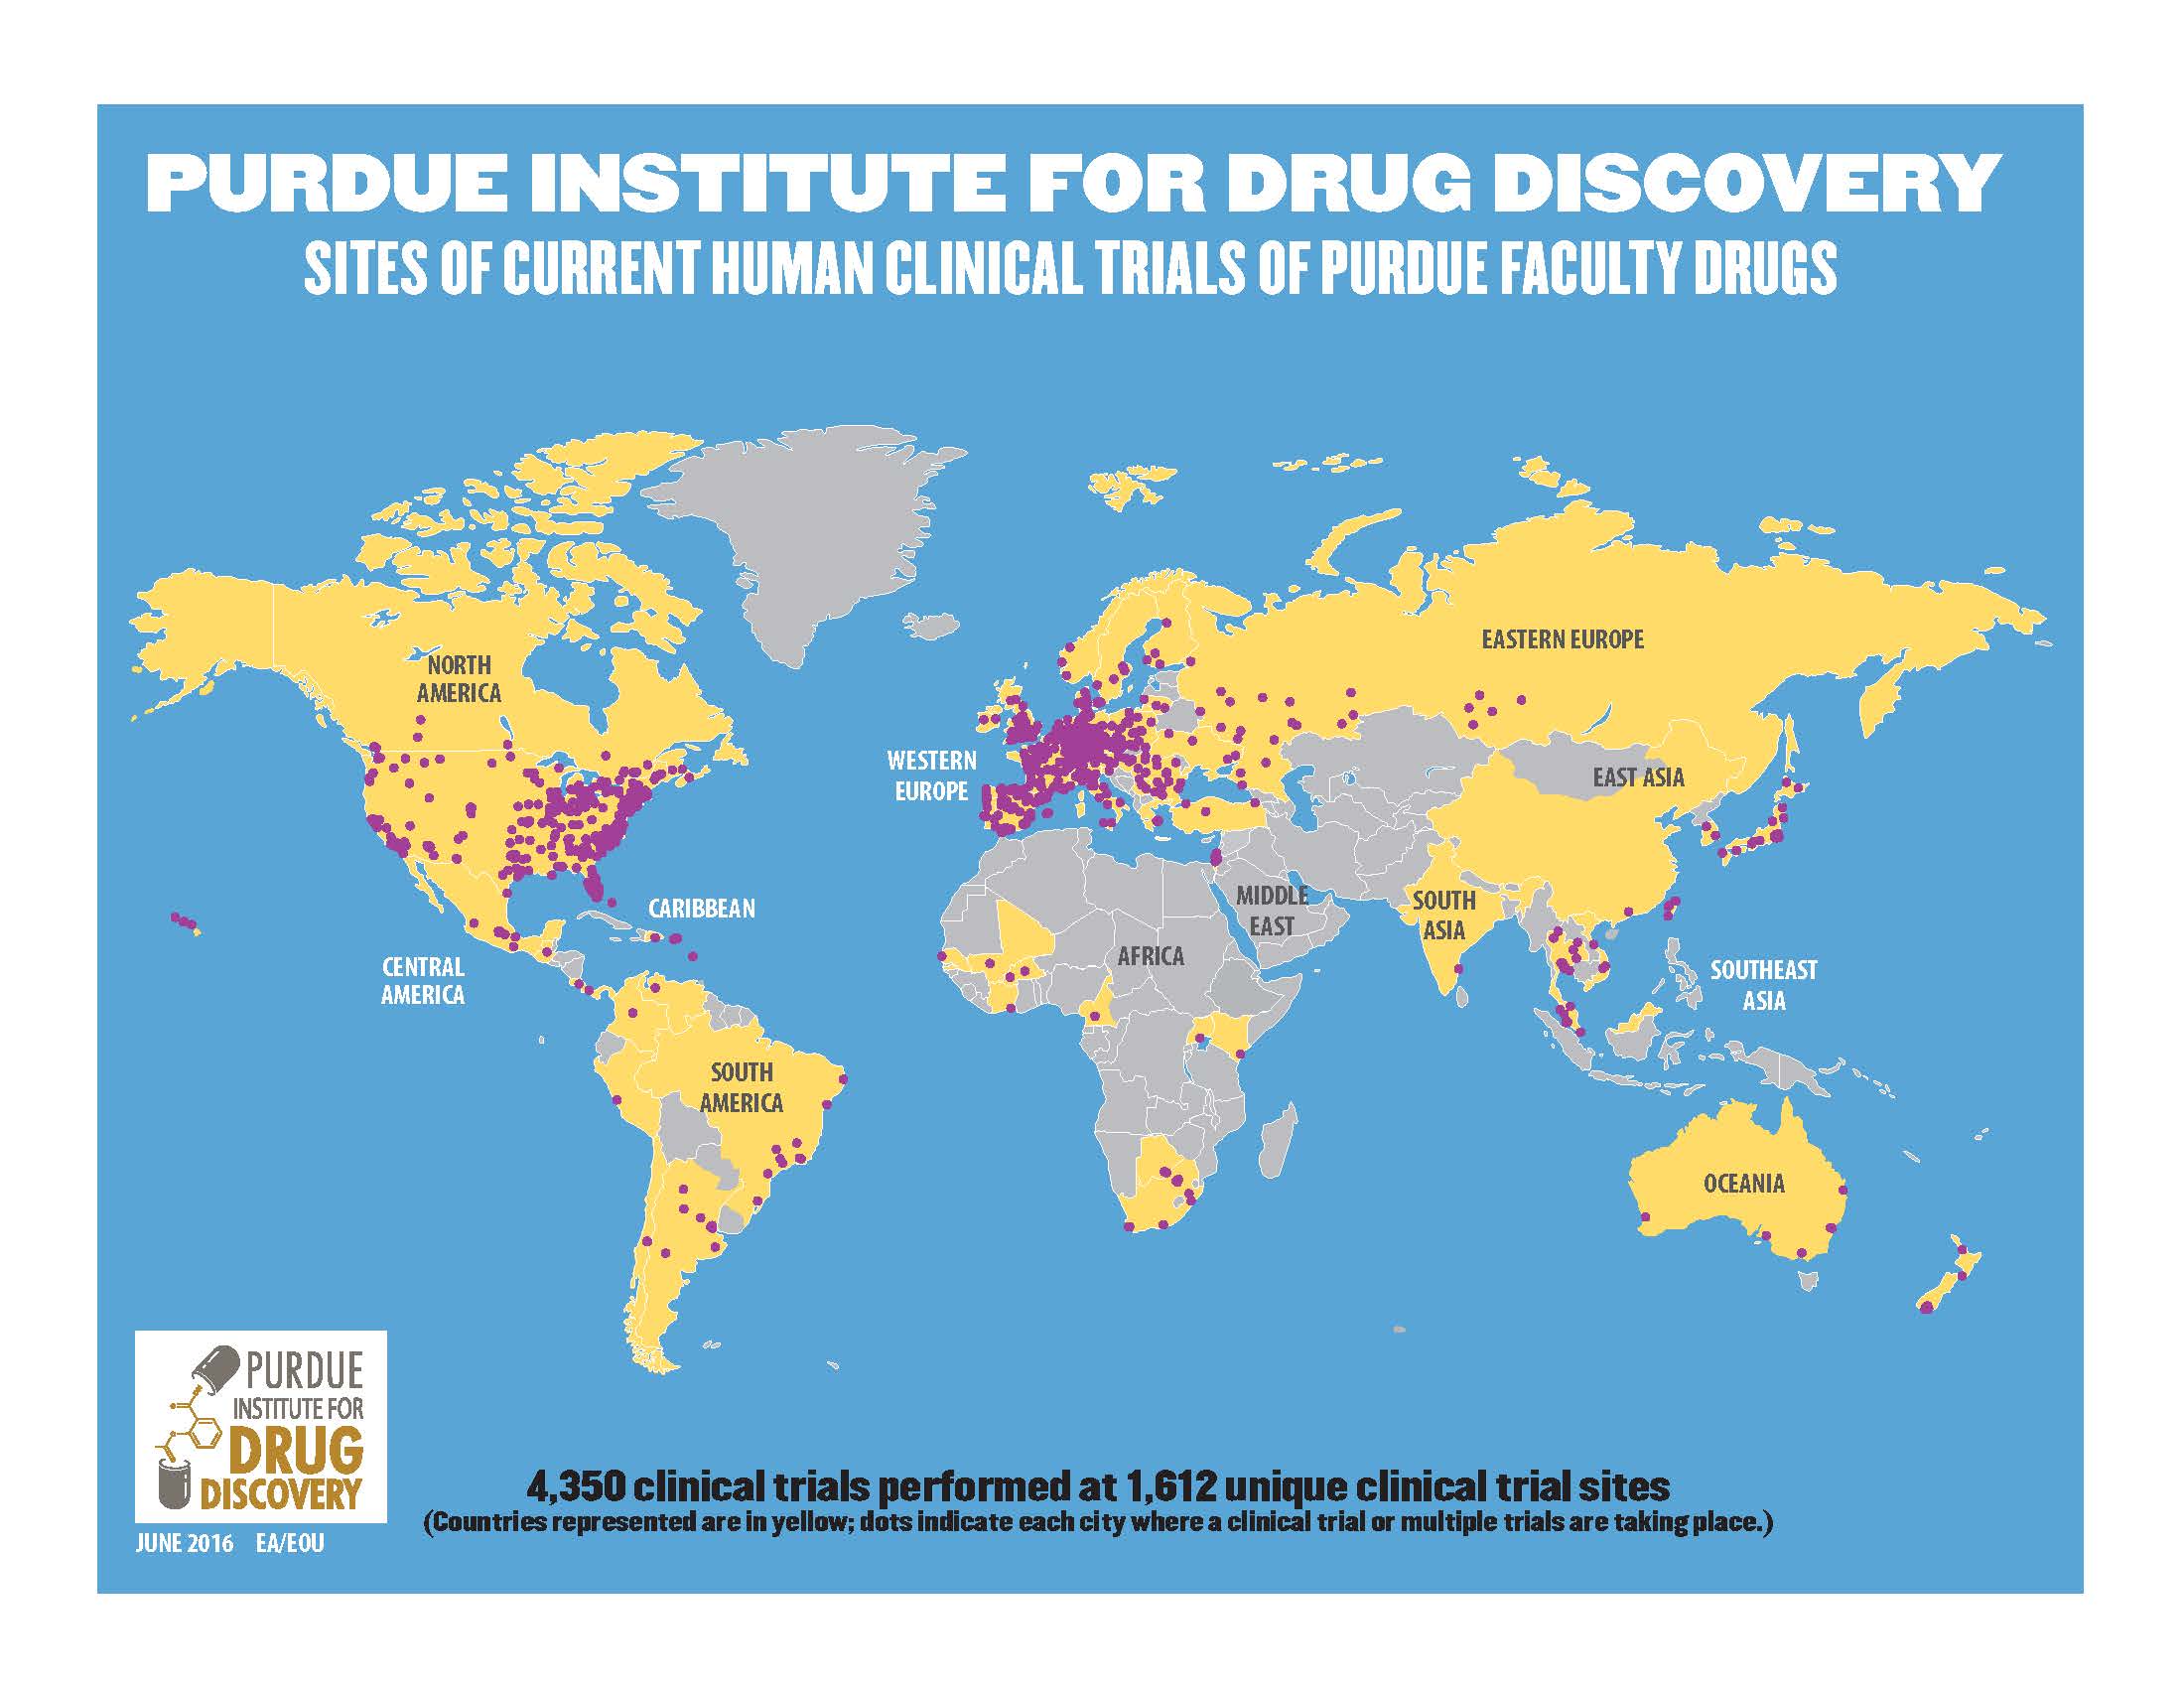 Purdue Institute for Drug Discovery. Sites of Current Human Clinical Trials of Purdue Facutly Drugs. 4,350
			clinical trials performed at 1,612 unique clinical trial sites. (Countries represented are in yellow, dots indicate each city where a clinical trial or multiple trials are taking place.)